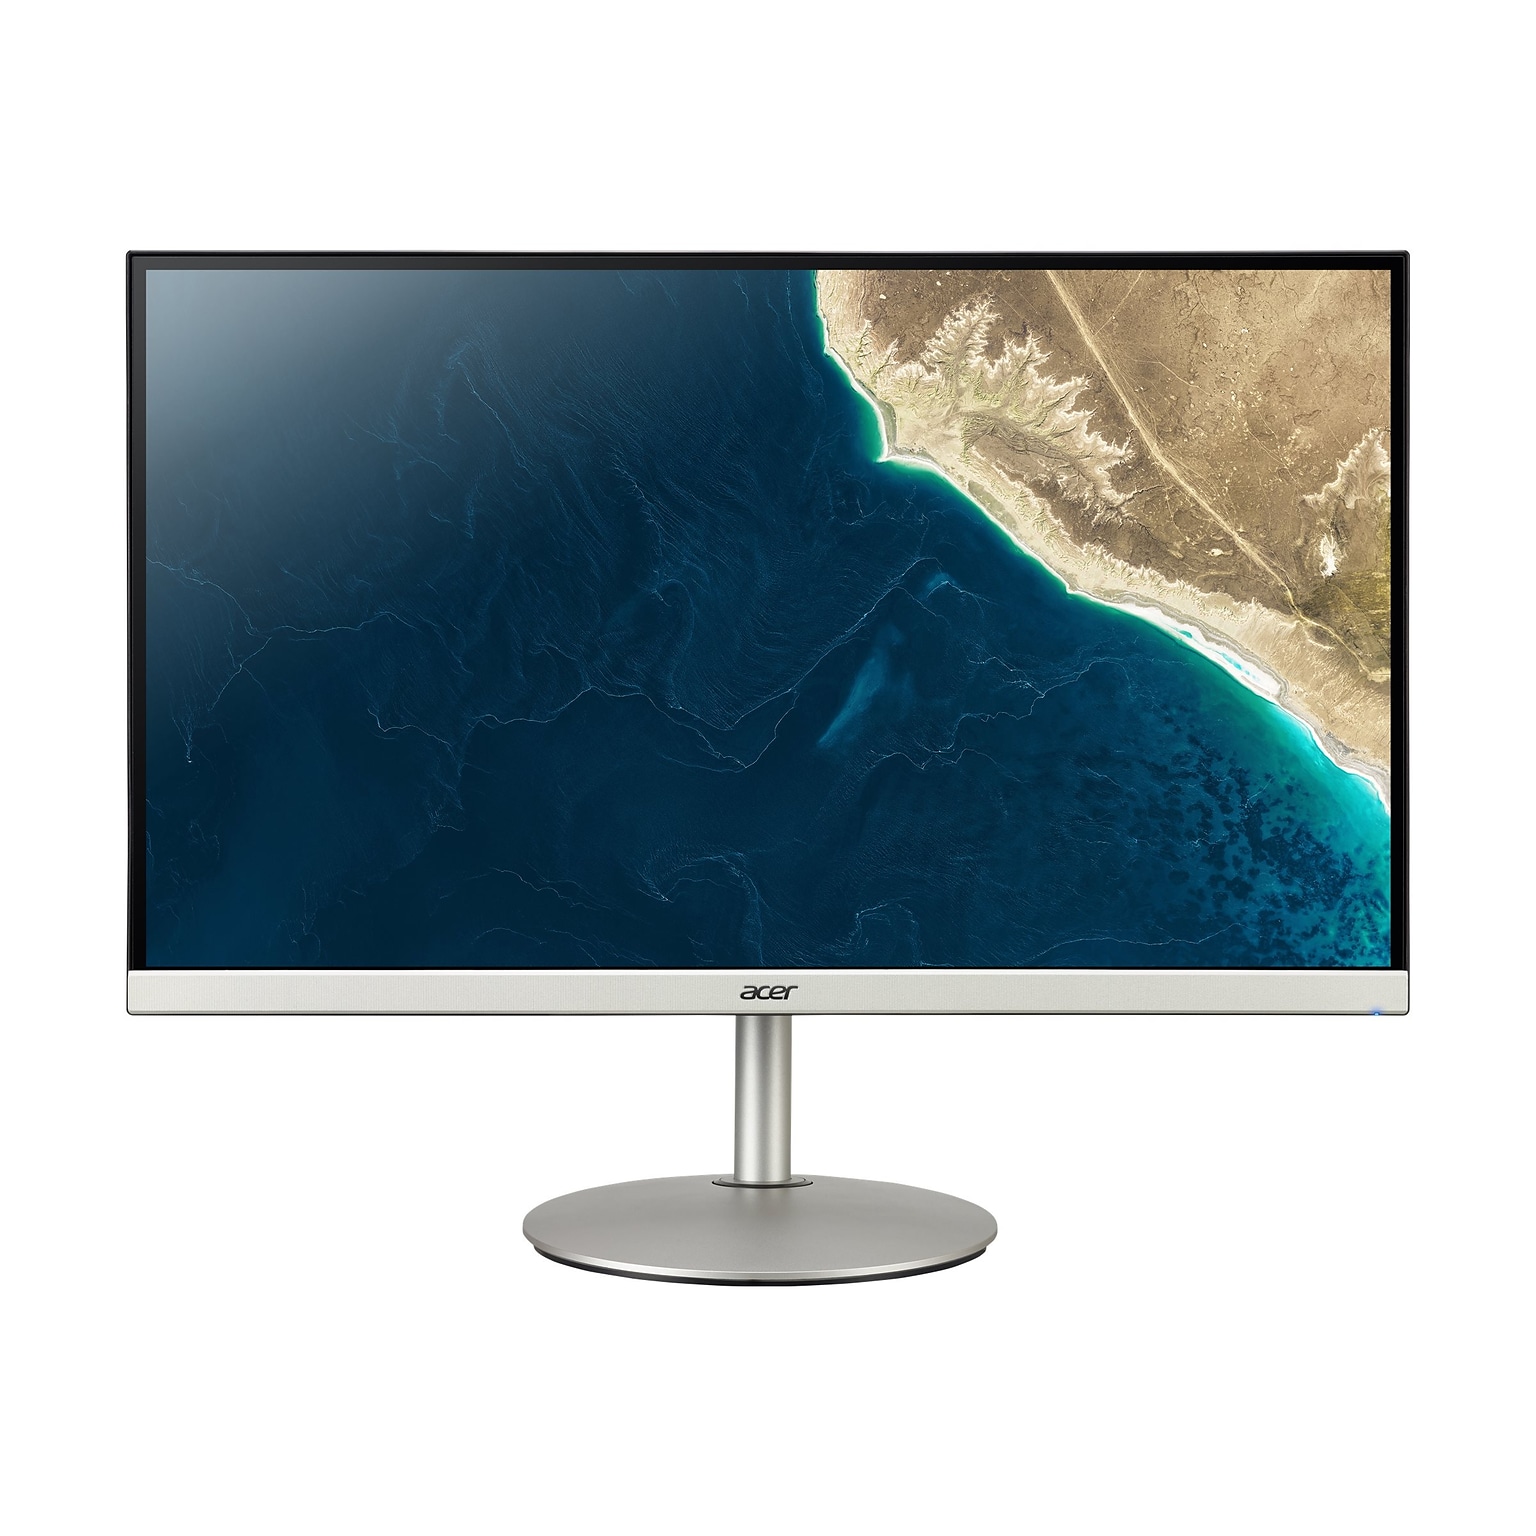 Acer CB272U smiiprx 27 LED Monitor, Silver (UM.HB2AA.005)